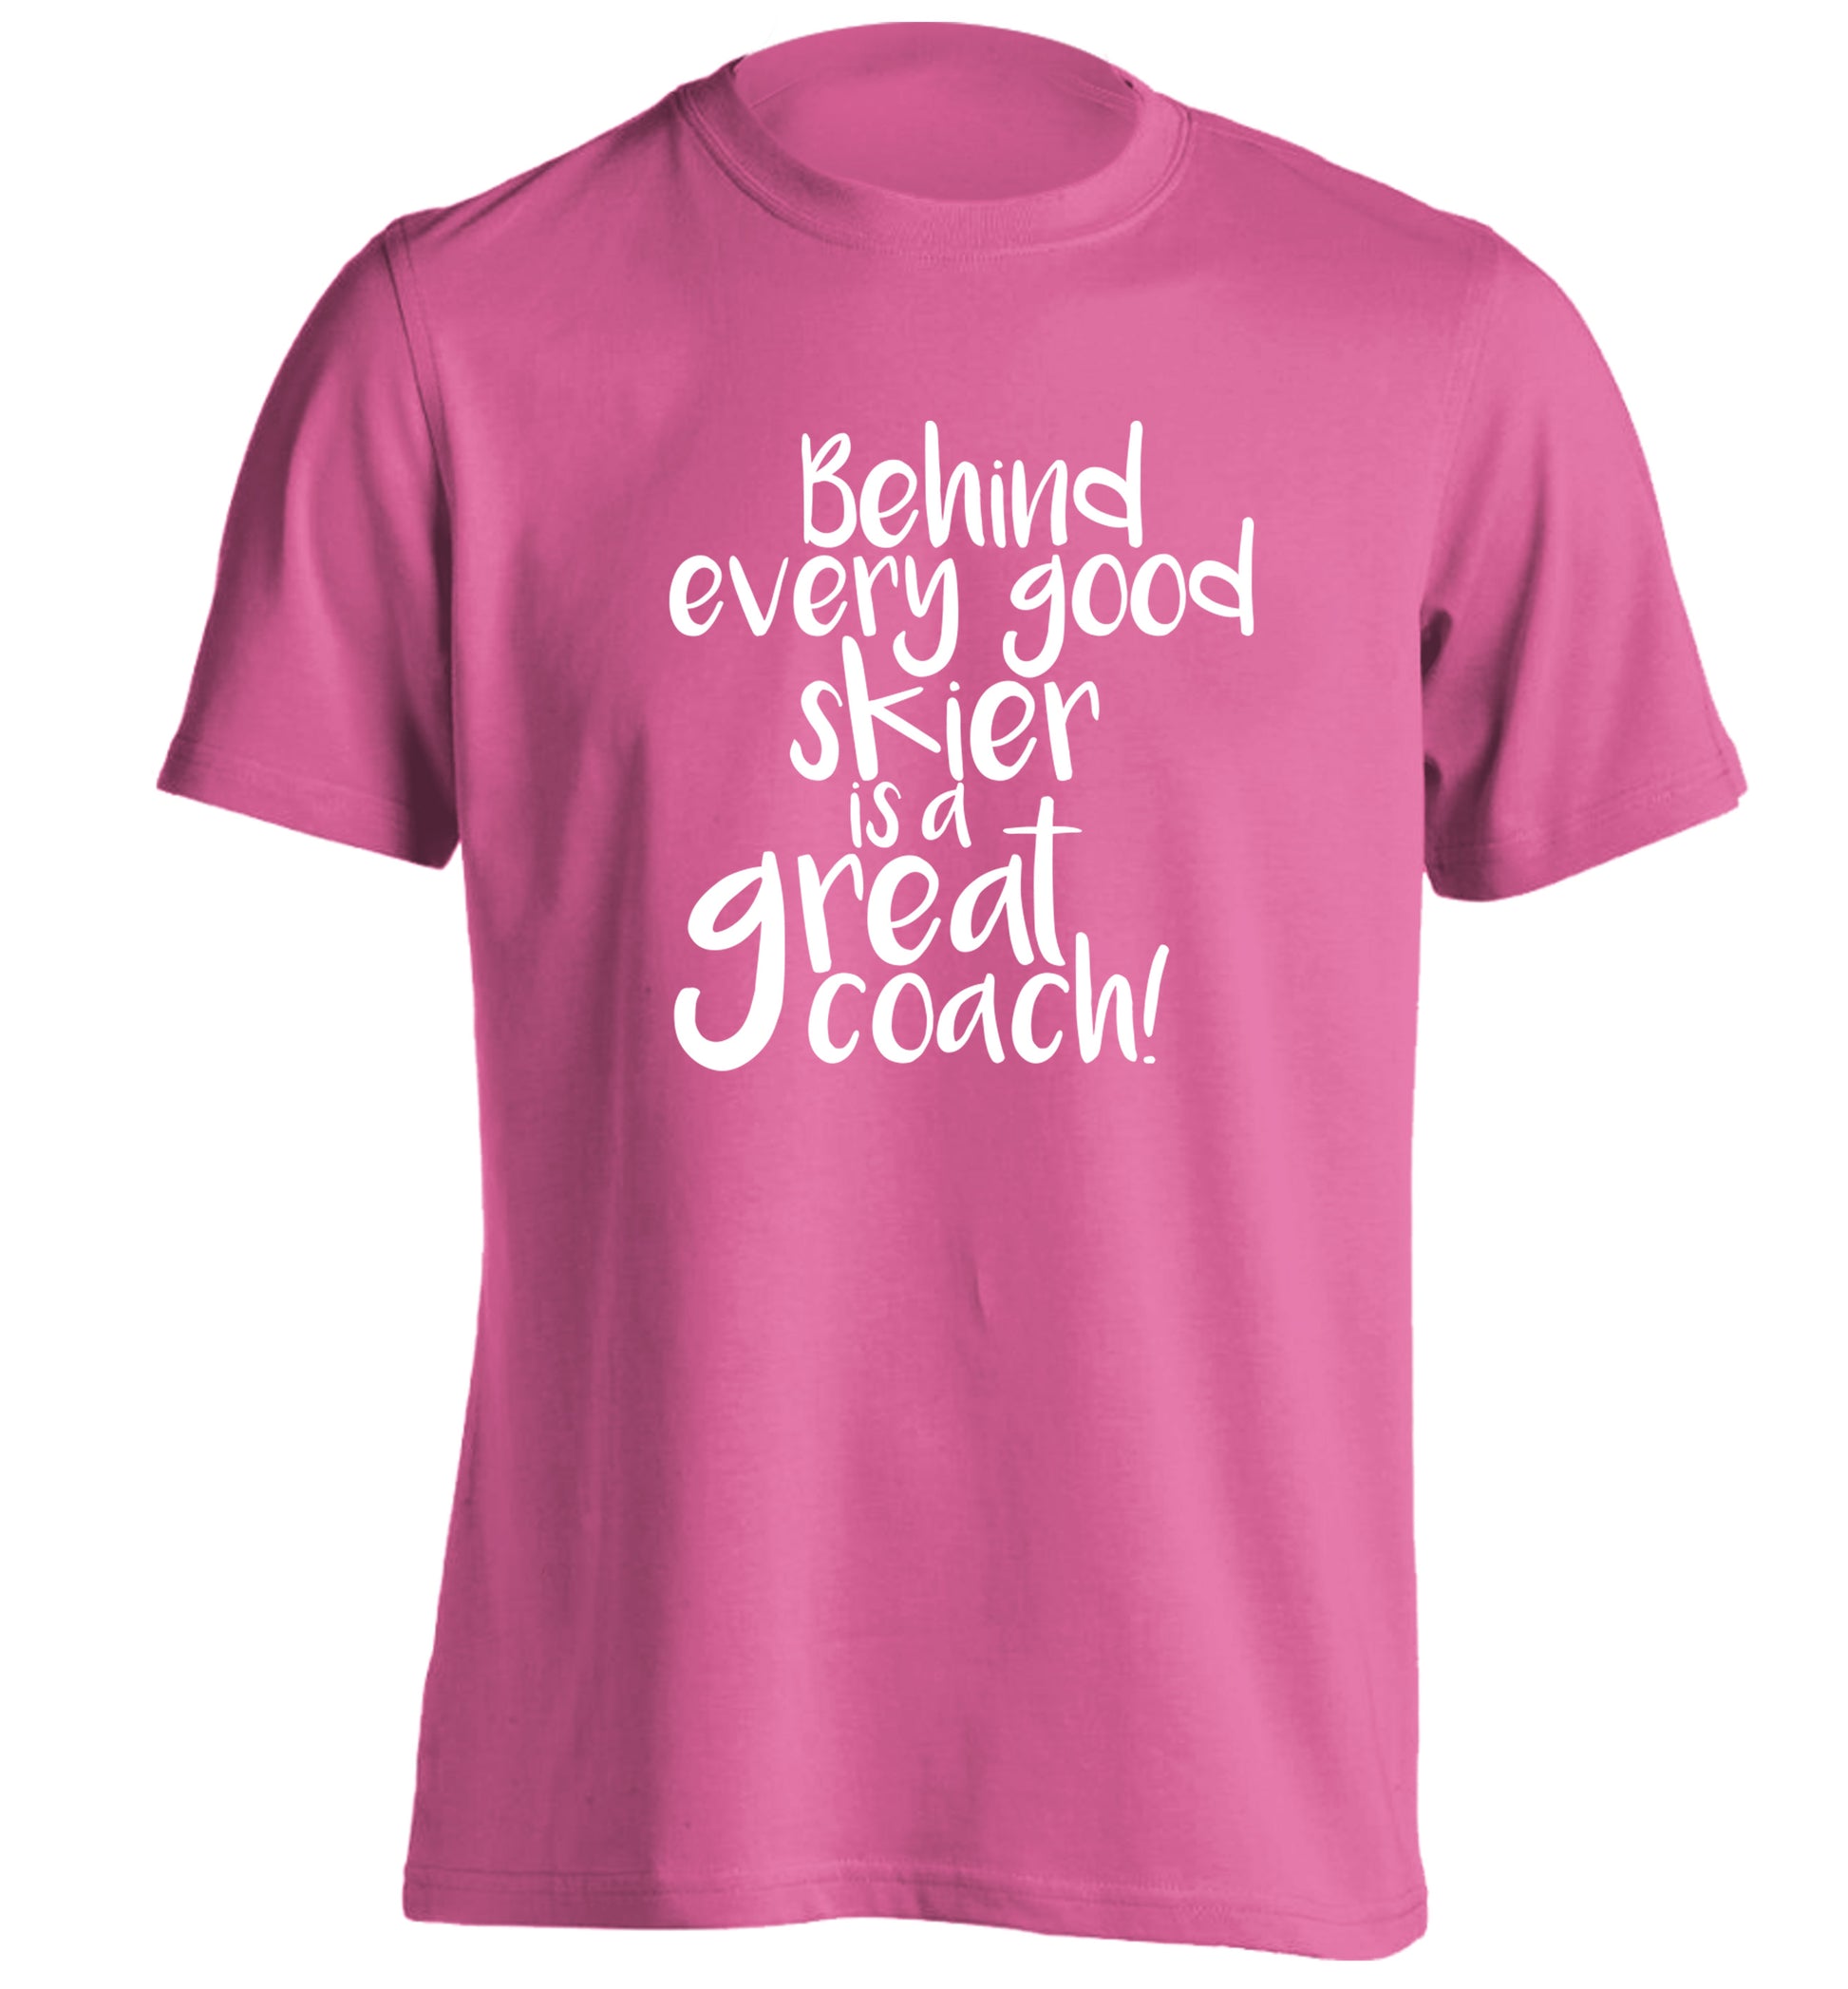 Behind every good skier is a great coach! adults unisexpink Tshirt 2XL